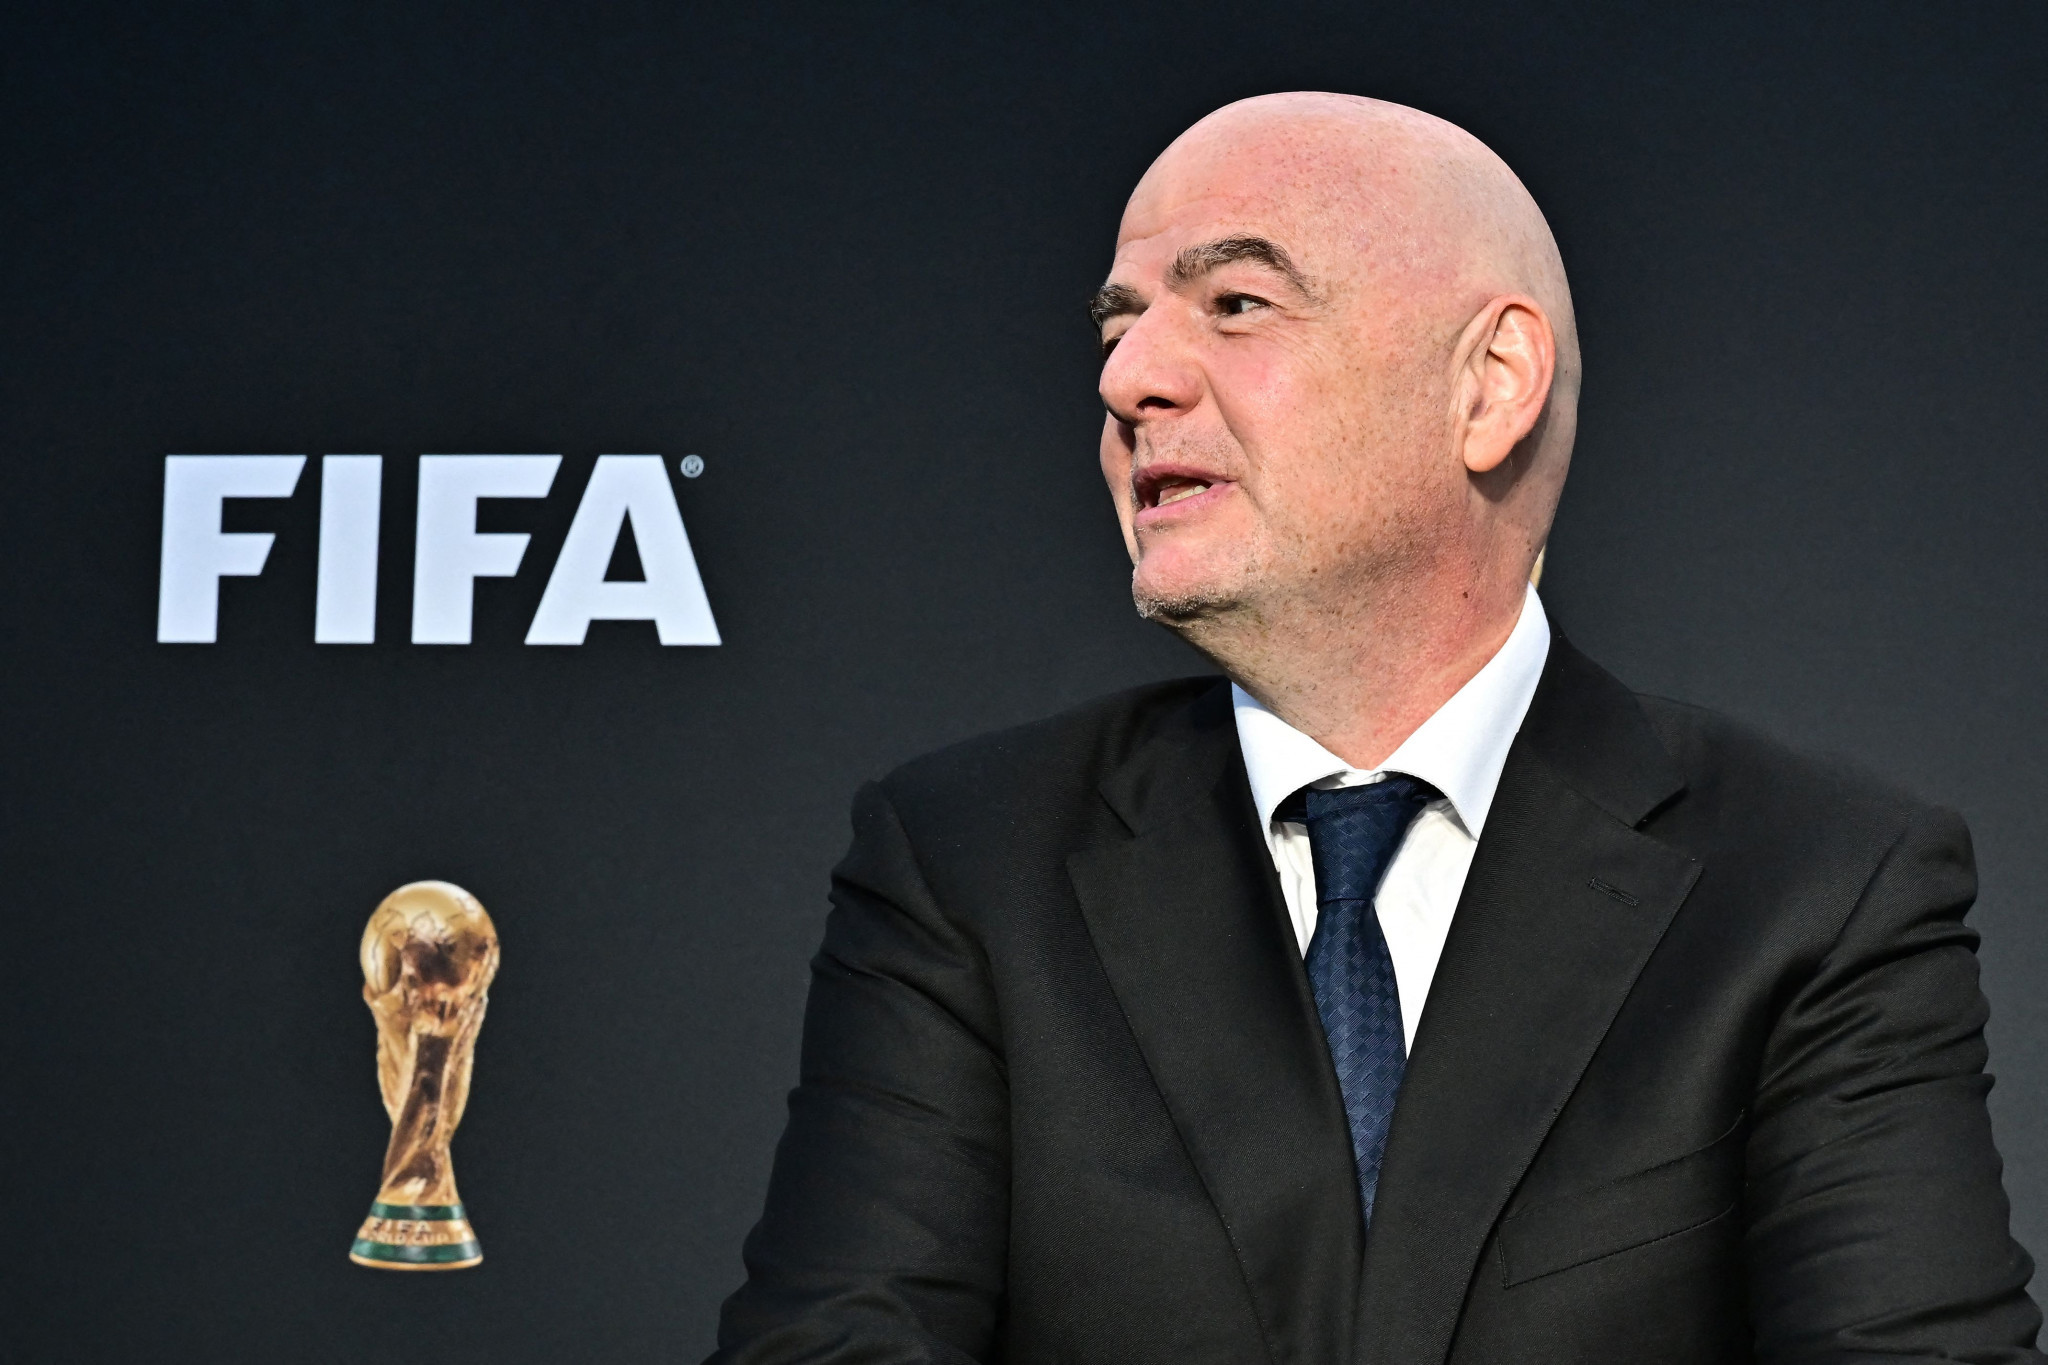 The regulation was extended unanimously at a meeting involving FIFA President Gianni Infantino ©Getty Images